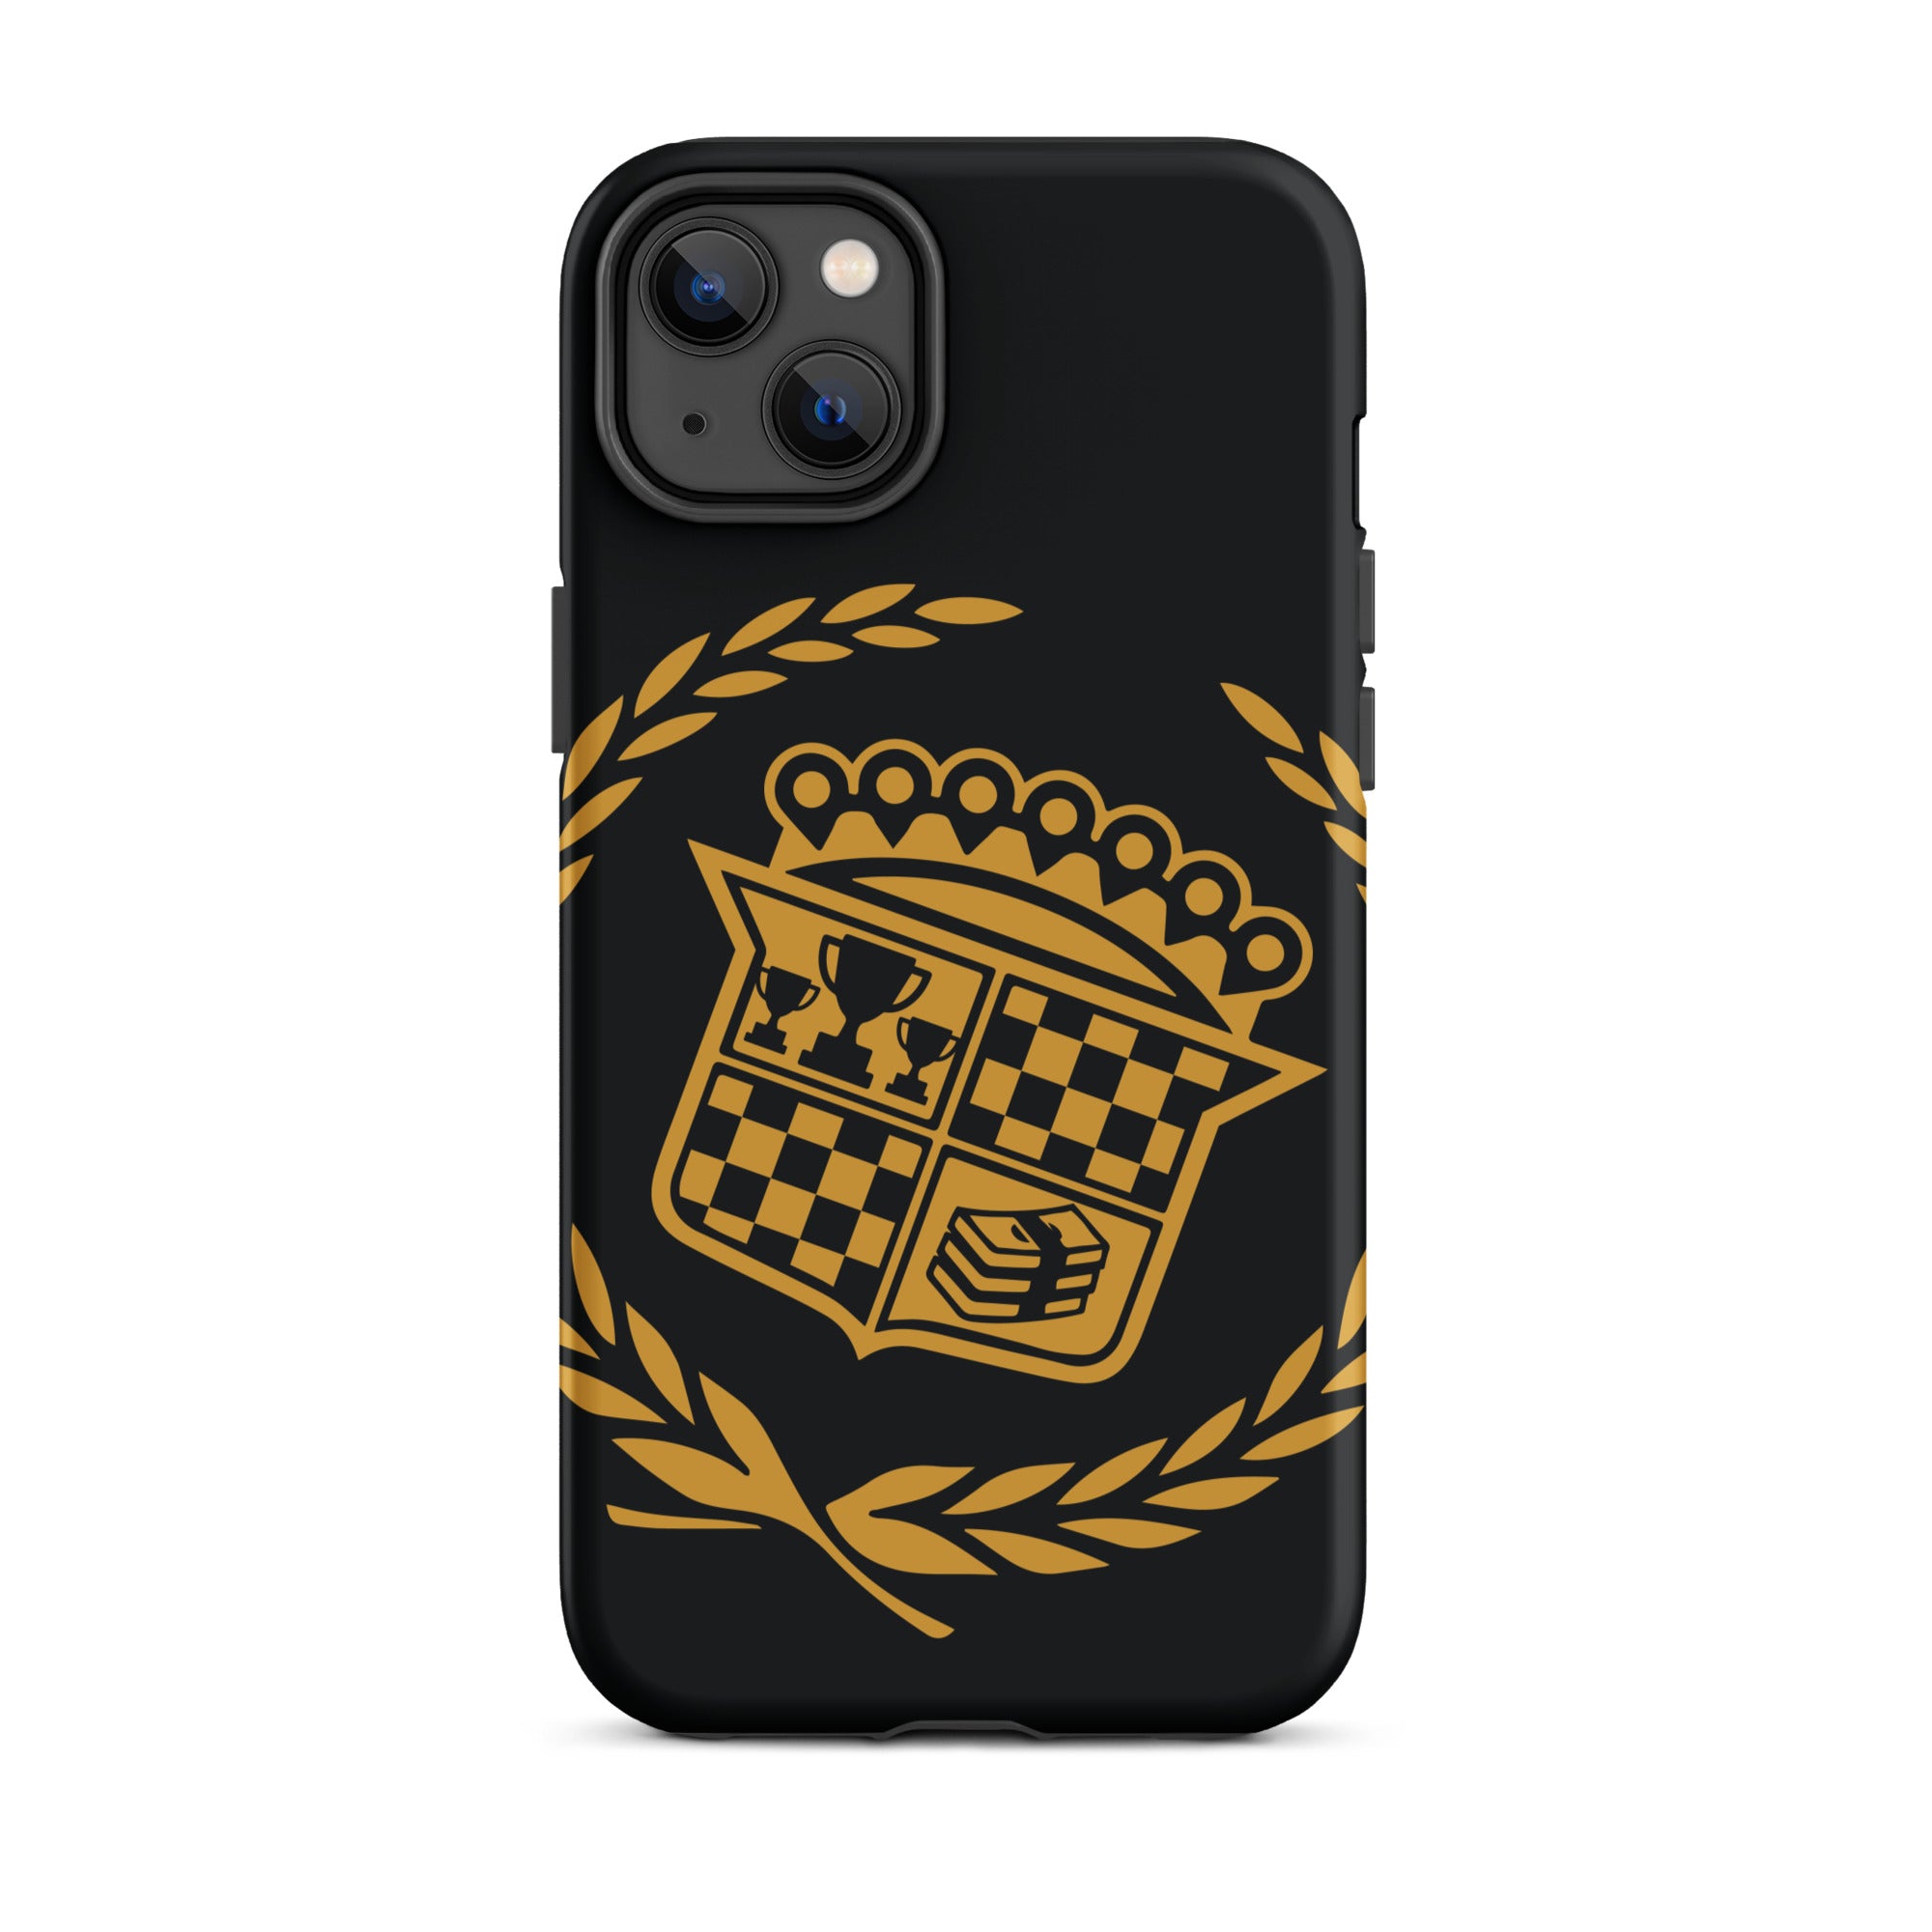 Crested iPhone Case